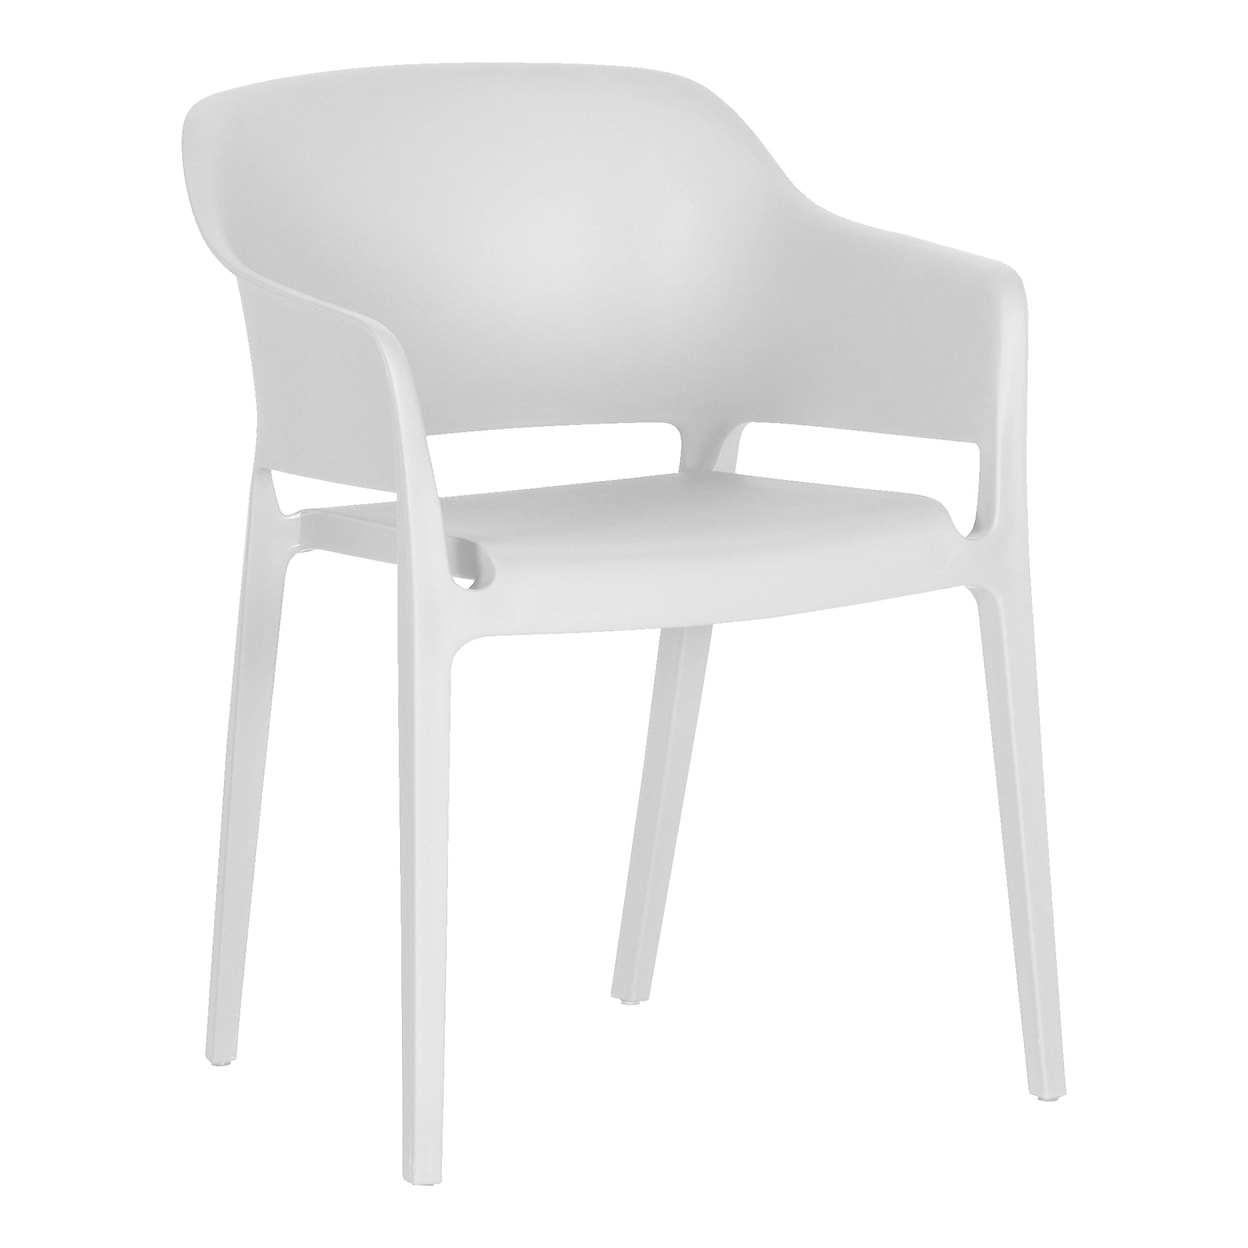 Moe's Home Collection Faro Outdoor Dining Chair